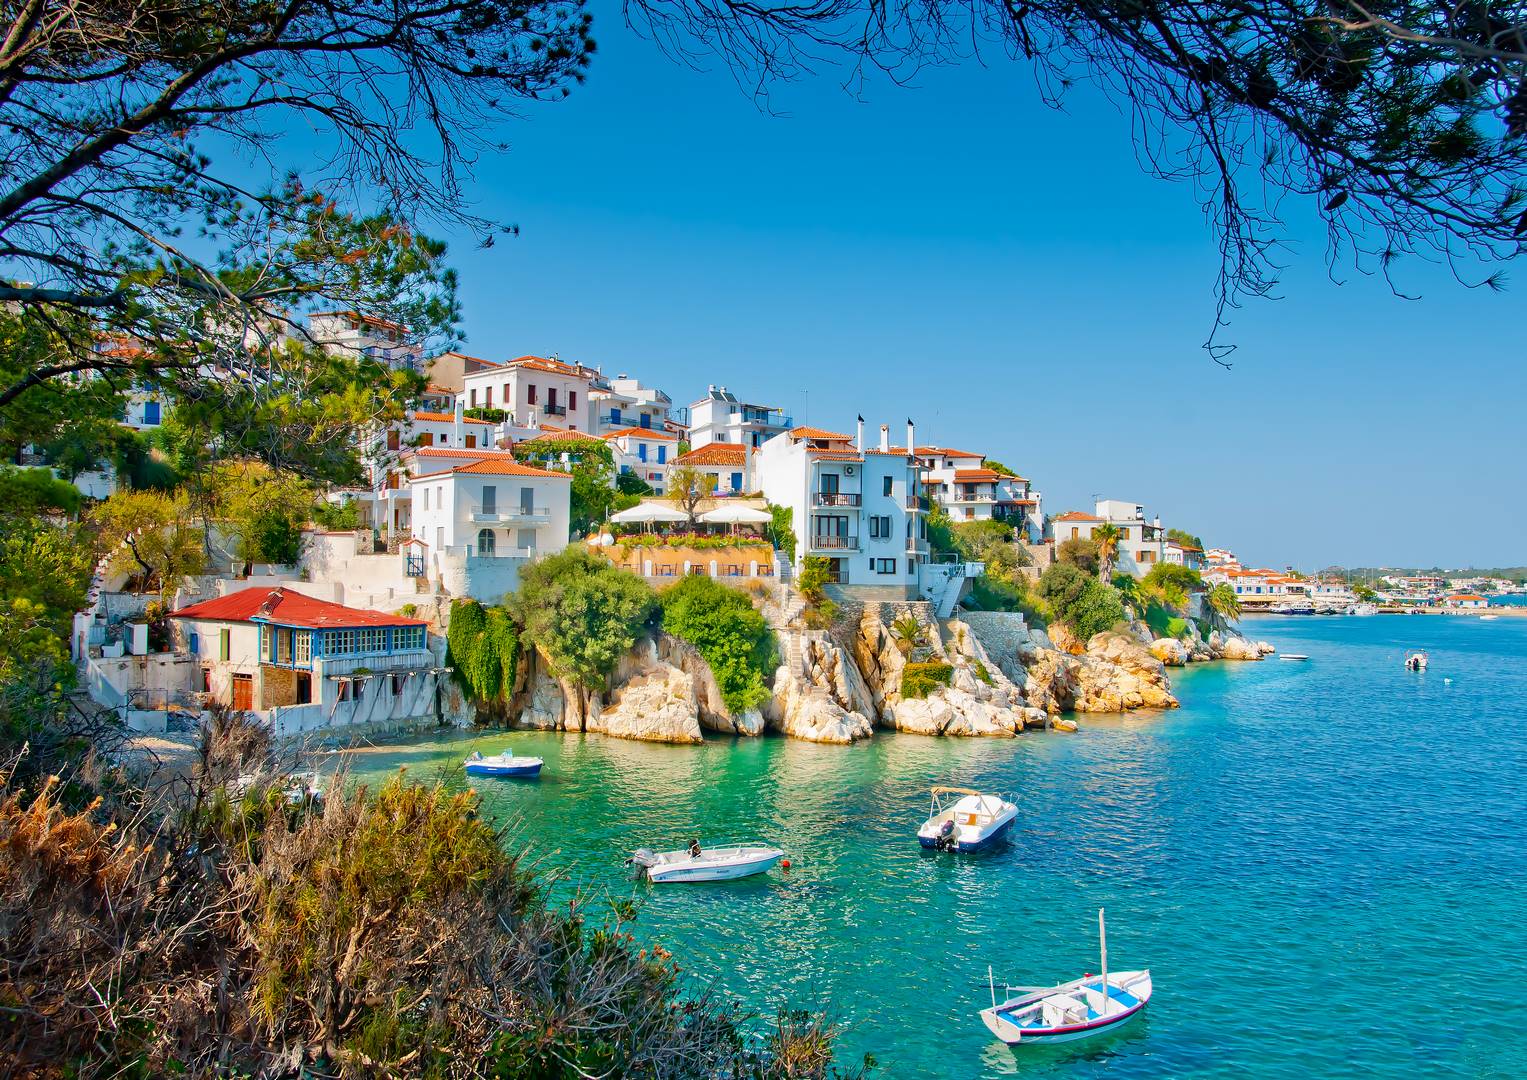 The Old Part In Town Of Island Skiathos In Greece